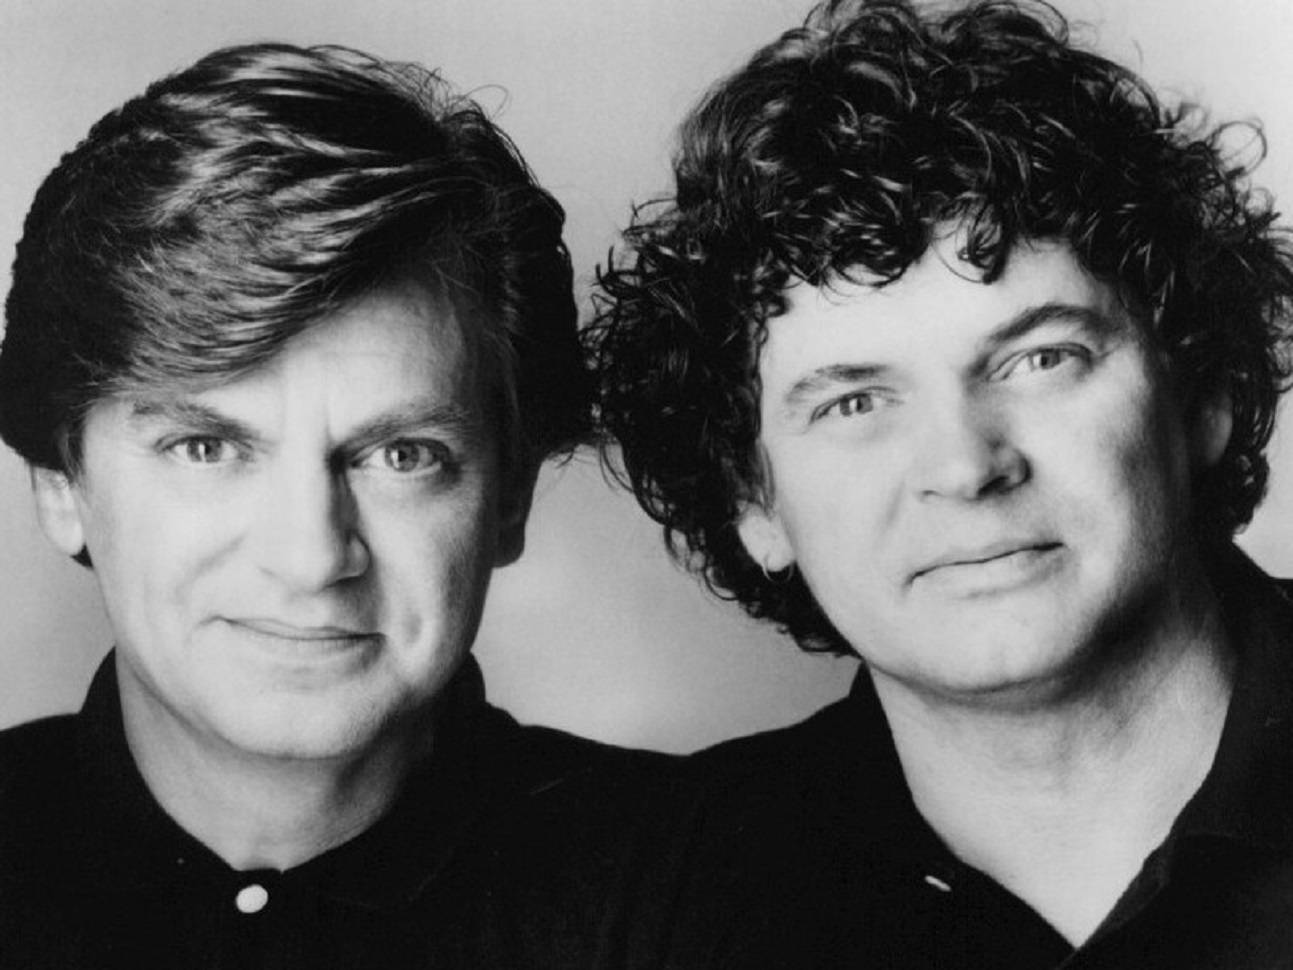 Everly Brothers 1985 Born Yesterday Album Back Cover Wallpaper